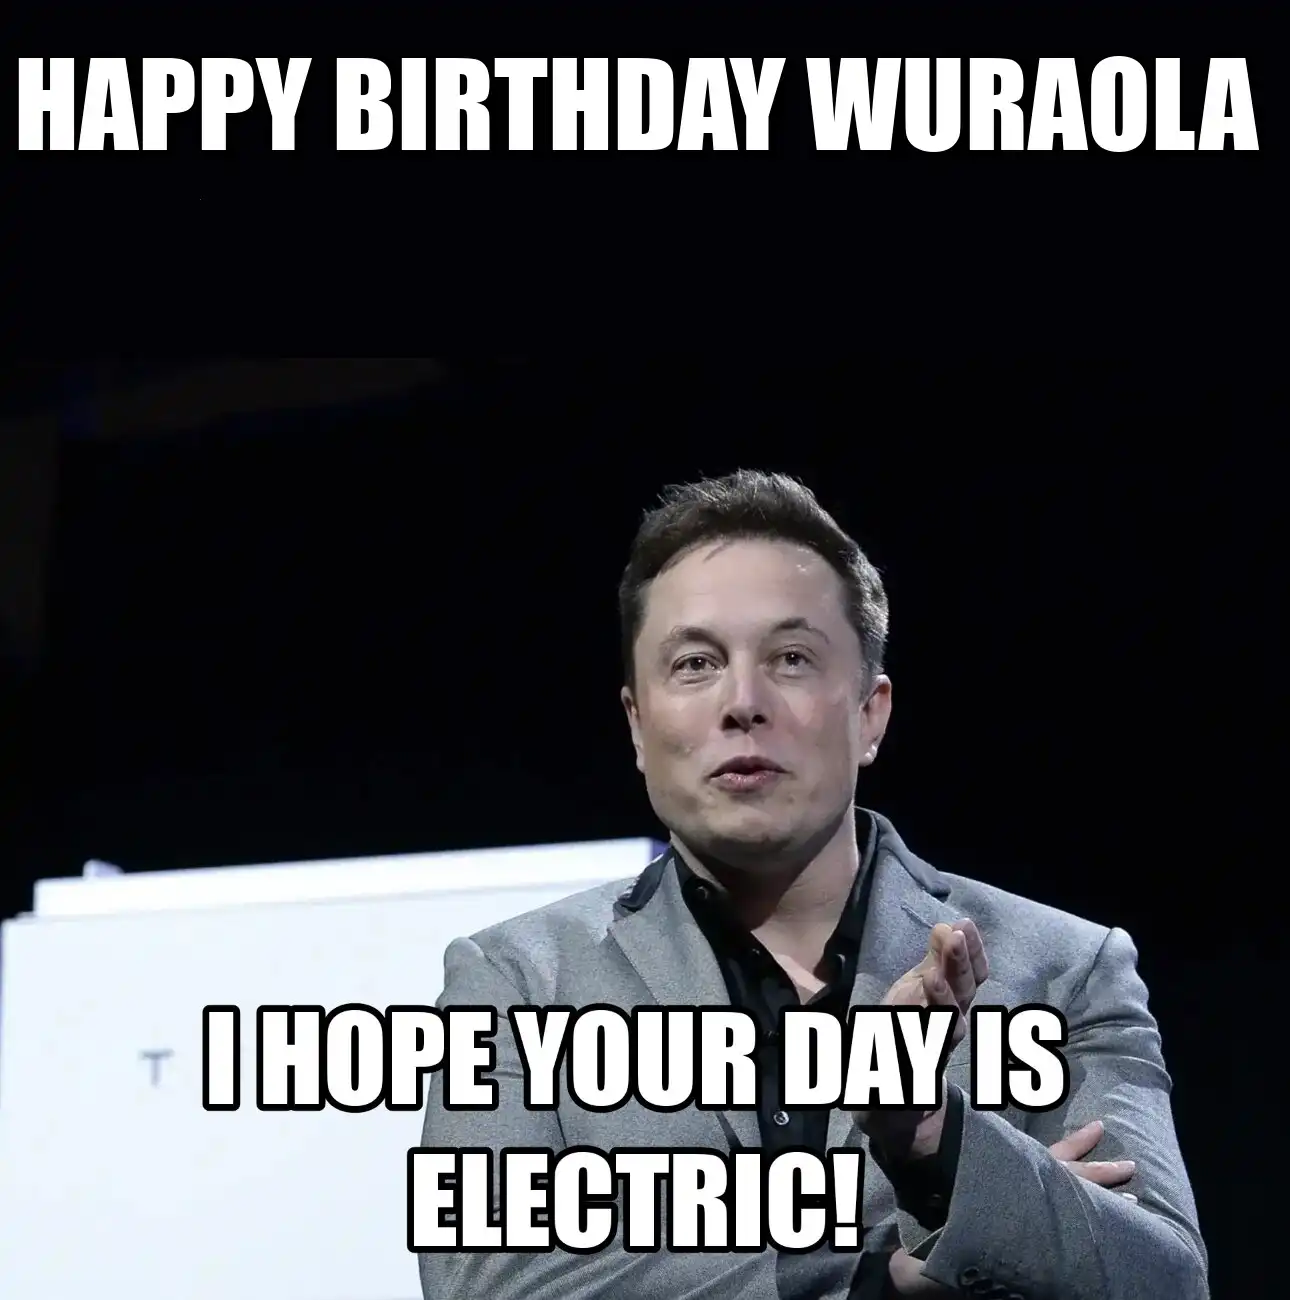 Happy Birthday Wuraola I Hope Your Day Is Electric Meme